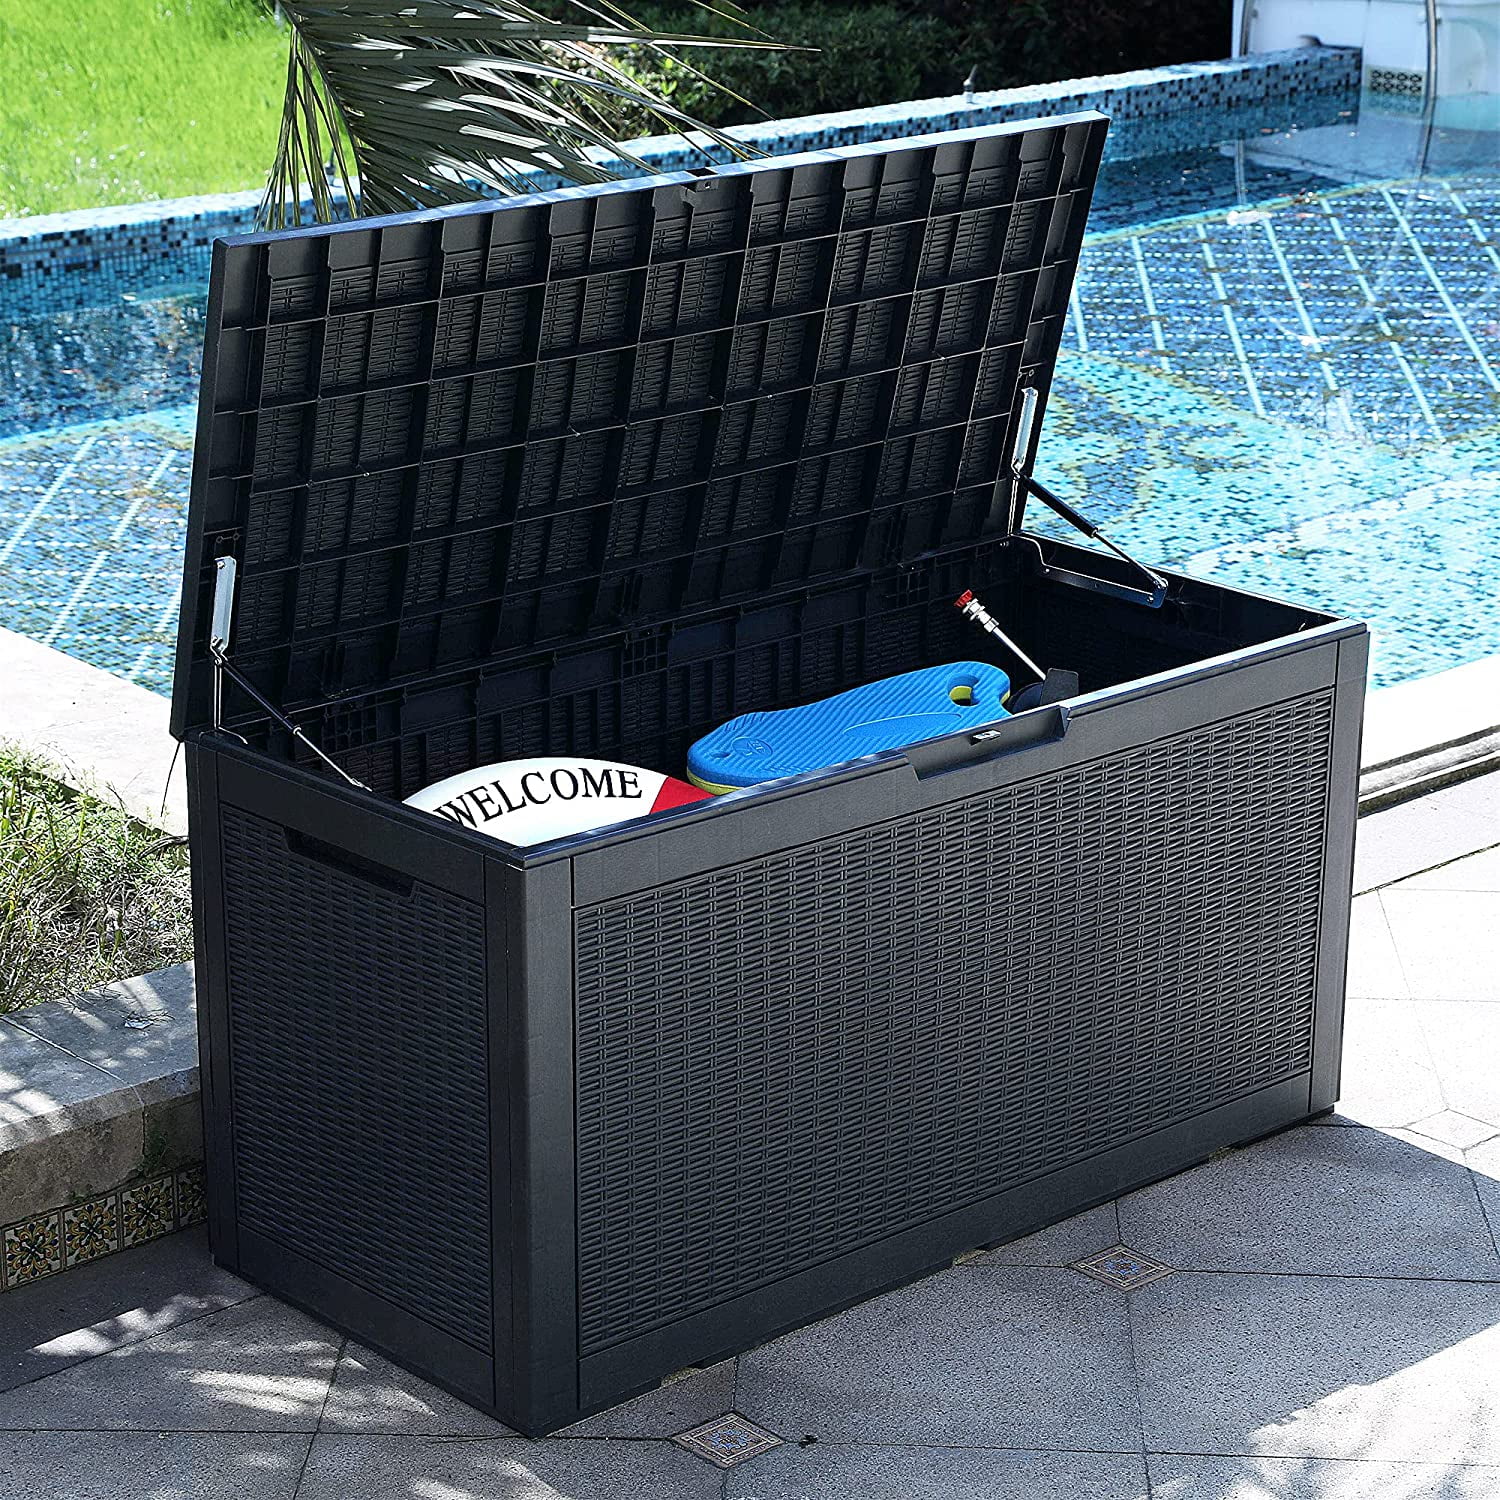 Garden Tools Pool Supplies Black Furniture and Sports Equipment,Water-resistant,Lockable YITAHOME Large Deck Box,Outdoor Storage Container 120 Gallon for Outdoor Pillows 